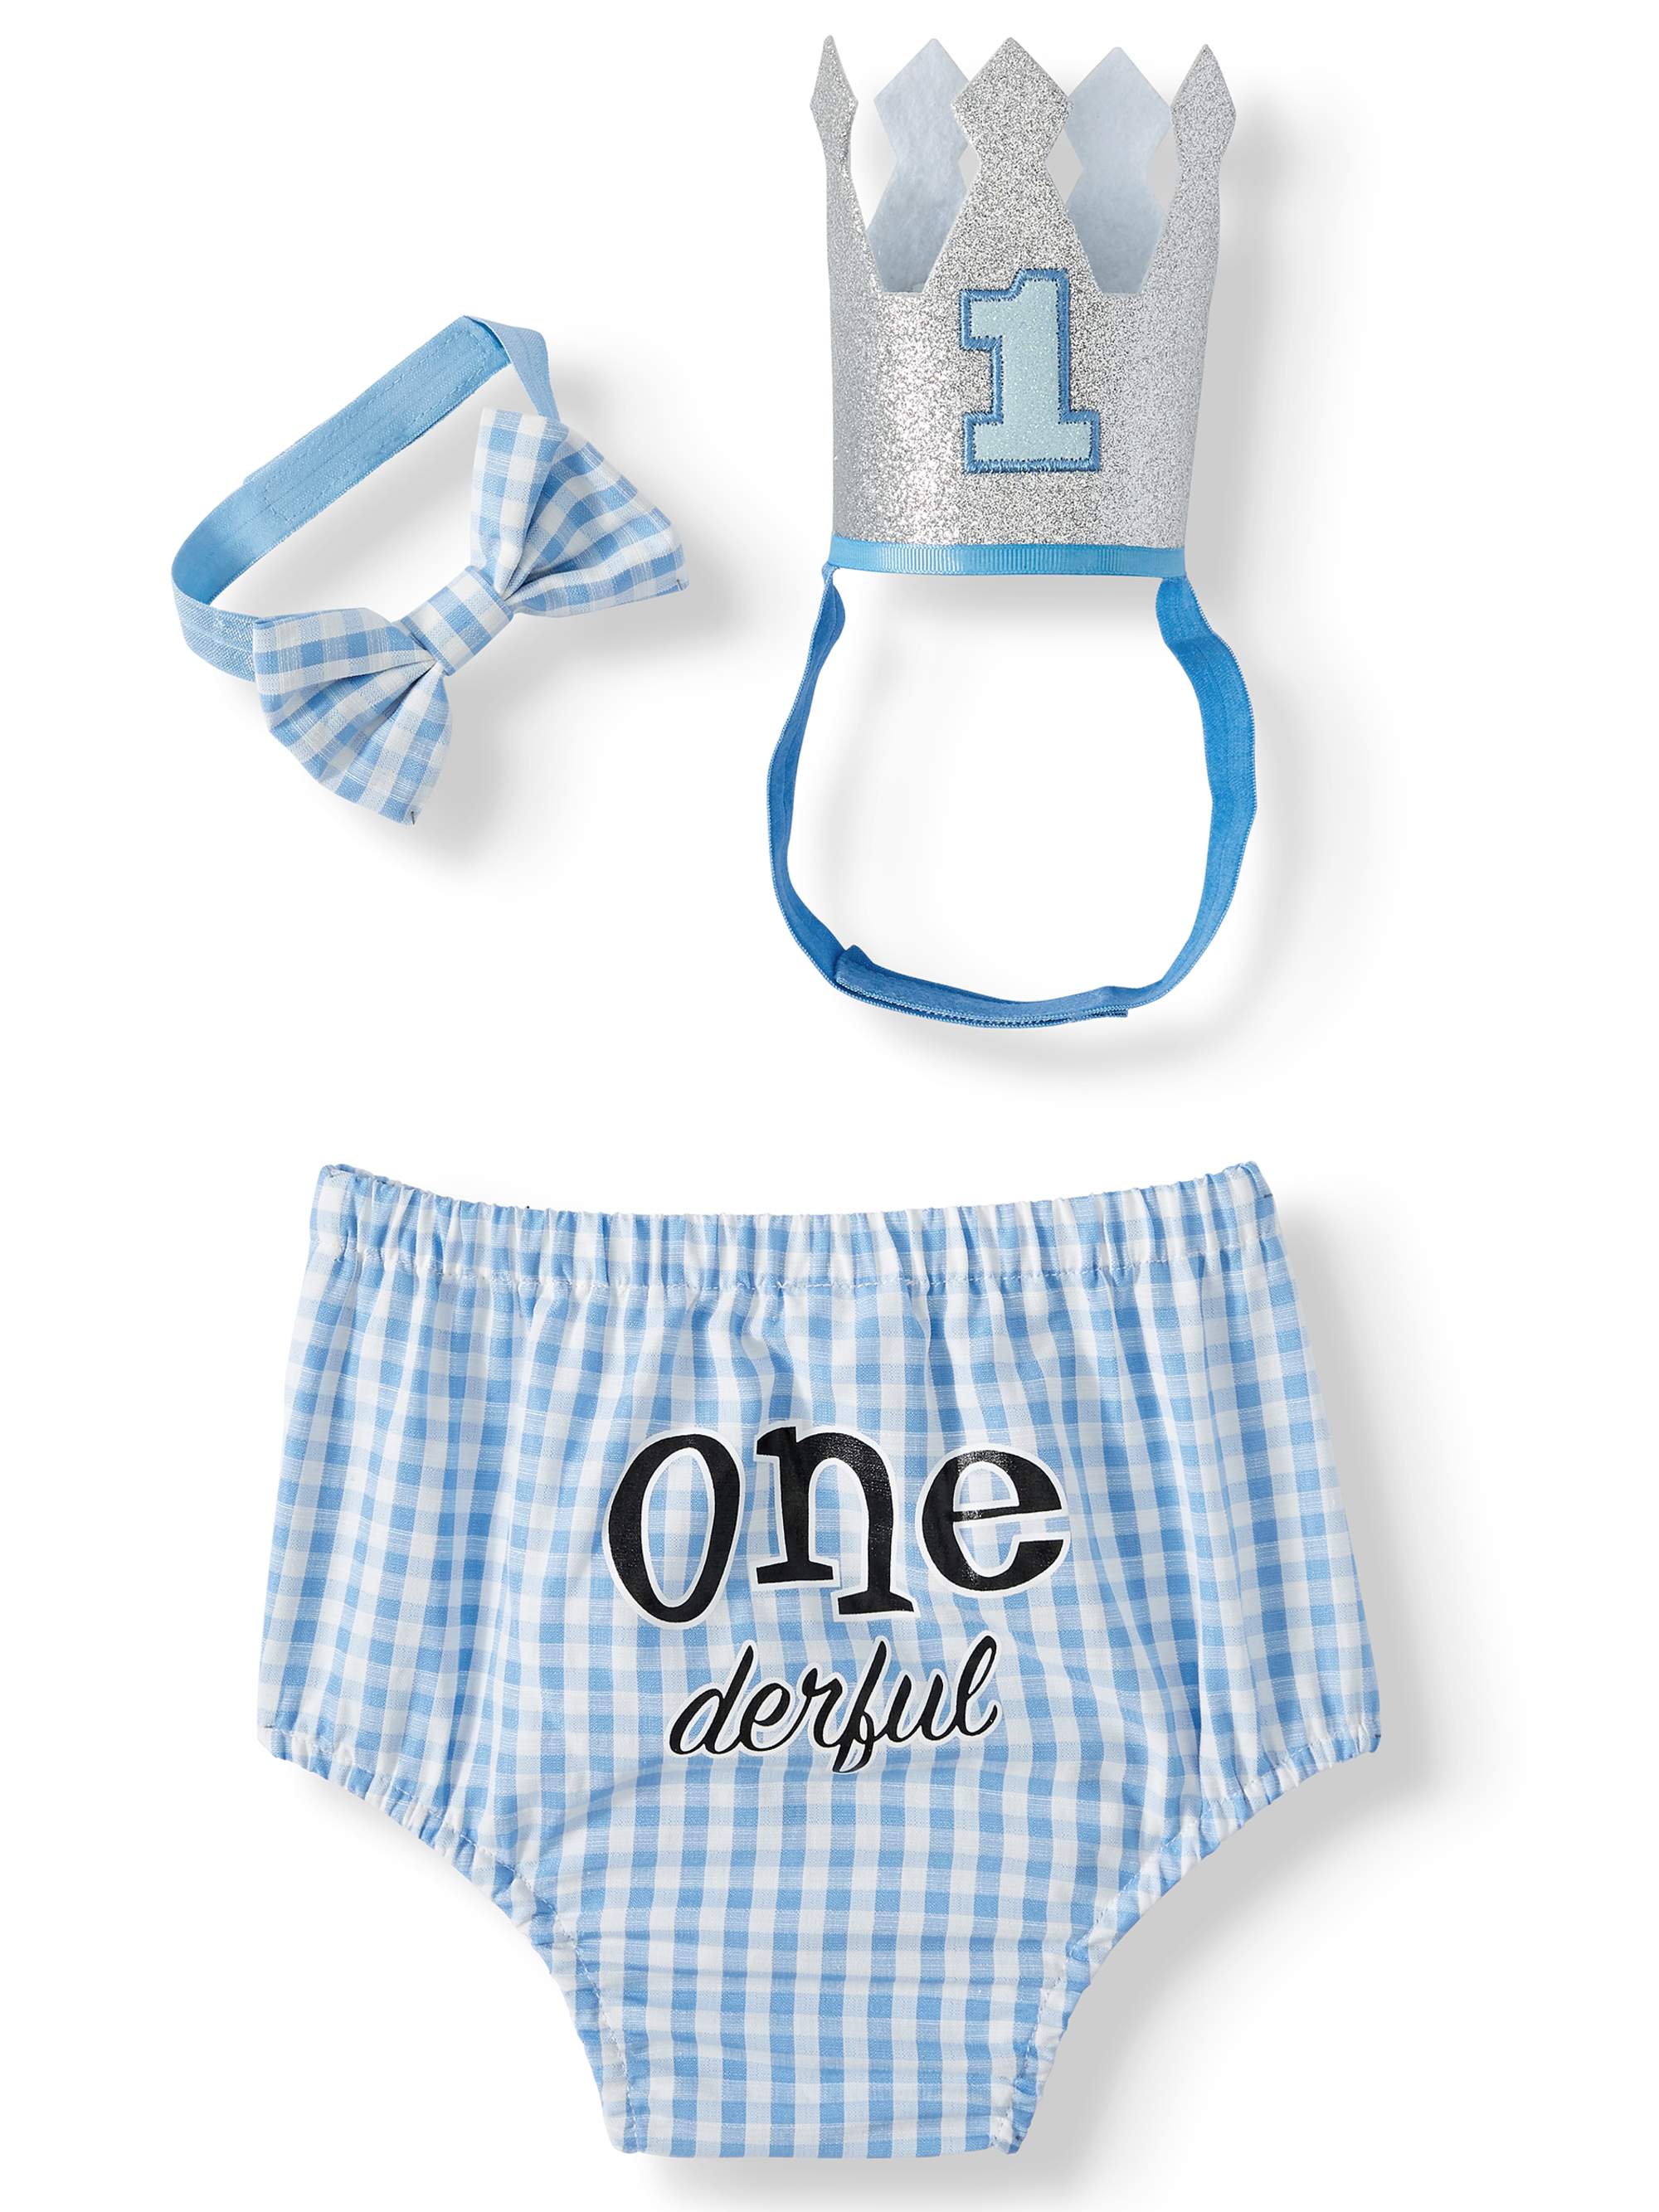 Baby Photo Outfit Sets Just $6.50 at Walmart!